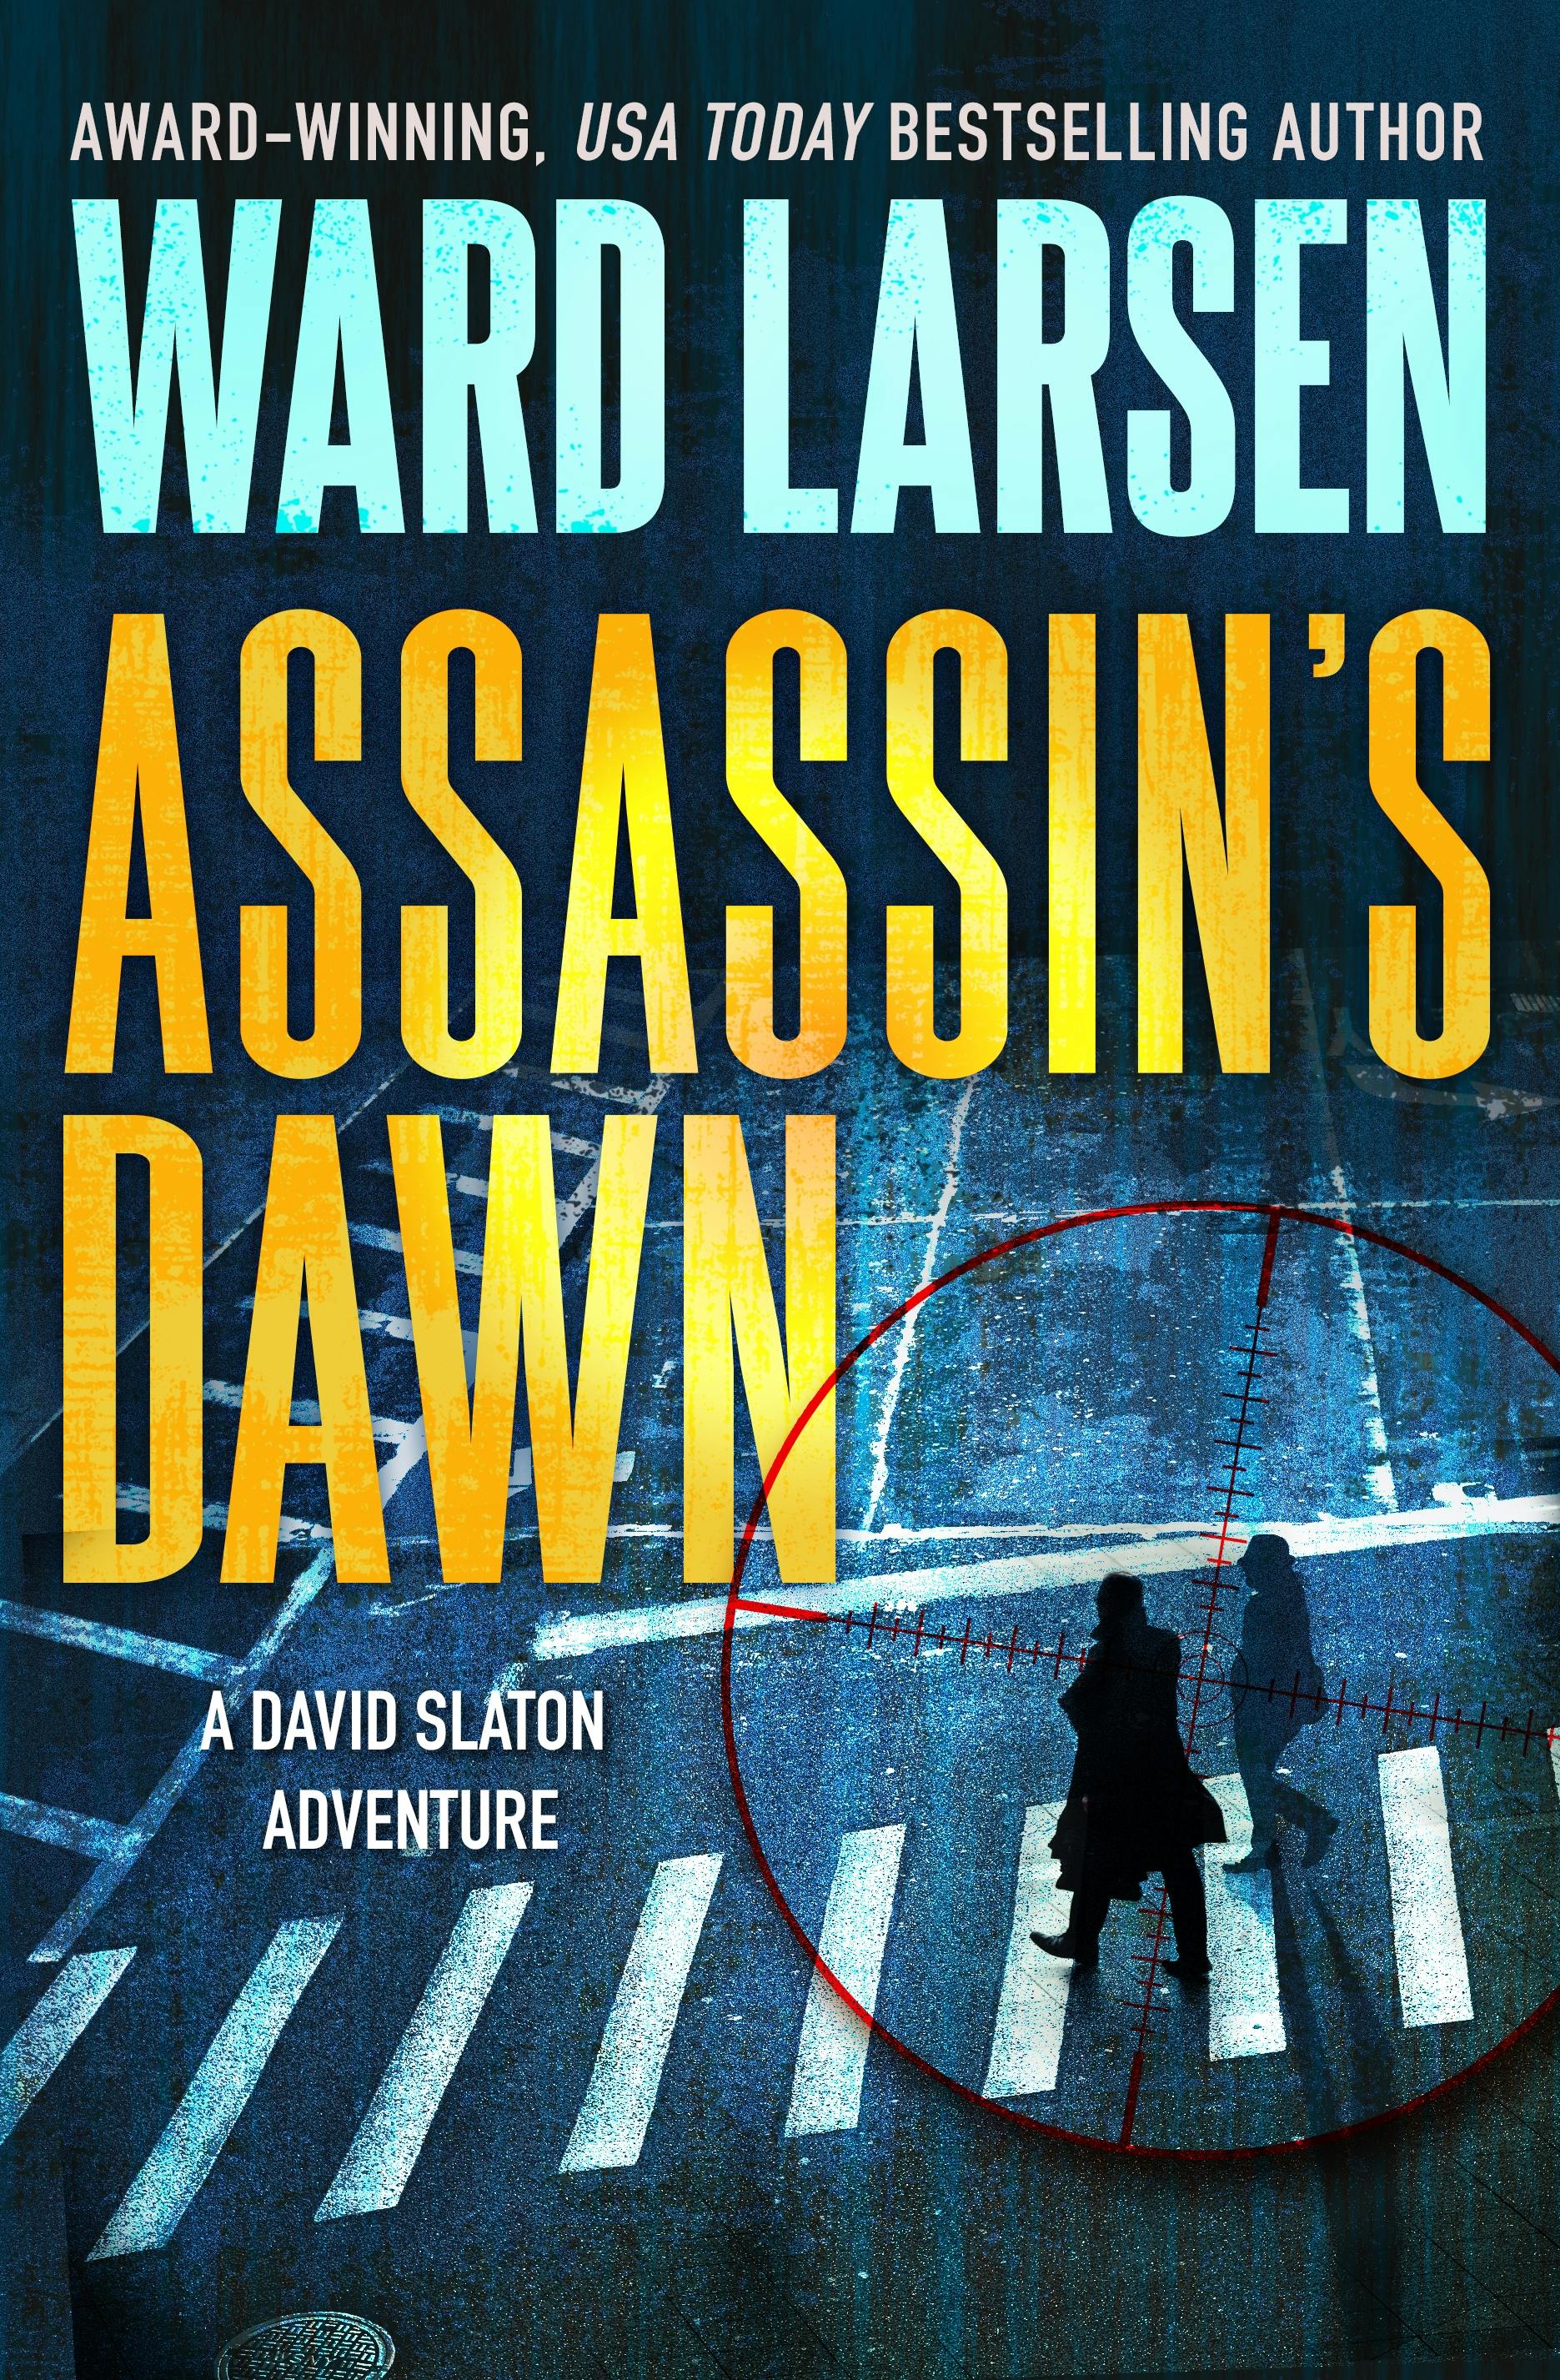 Cover for the book titled as: Assassin's Dawn